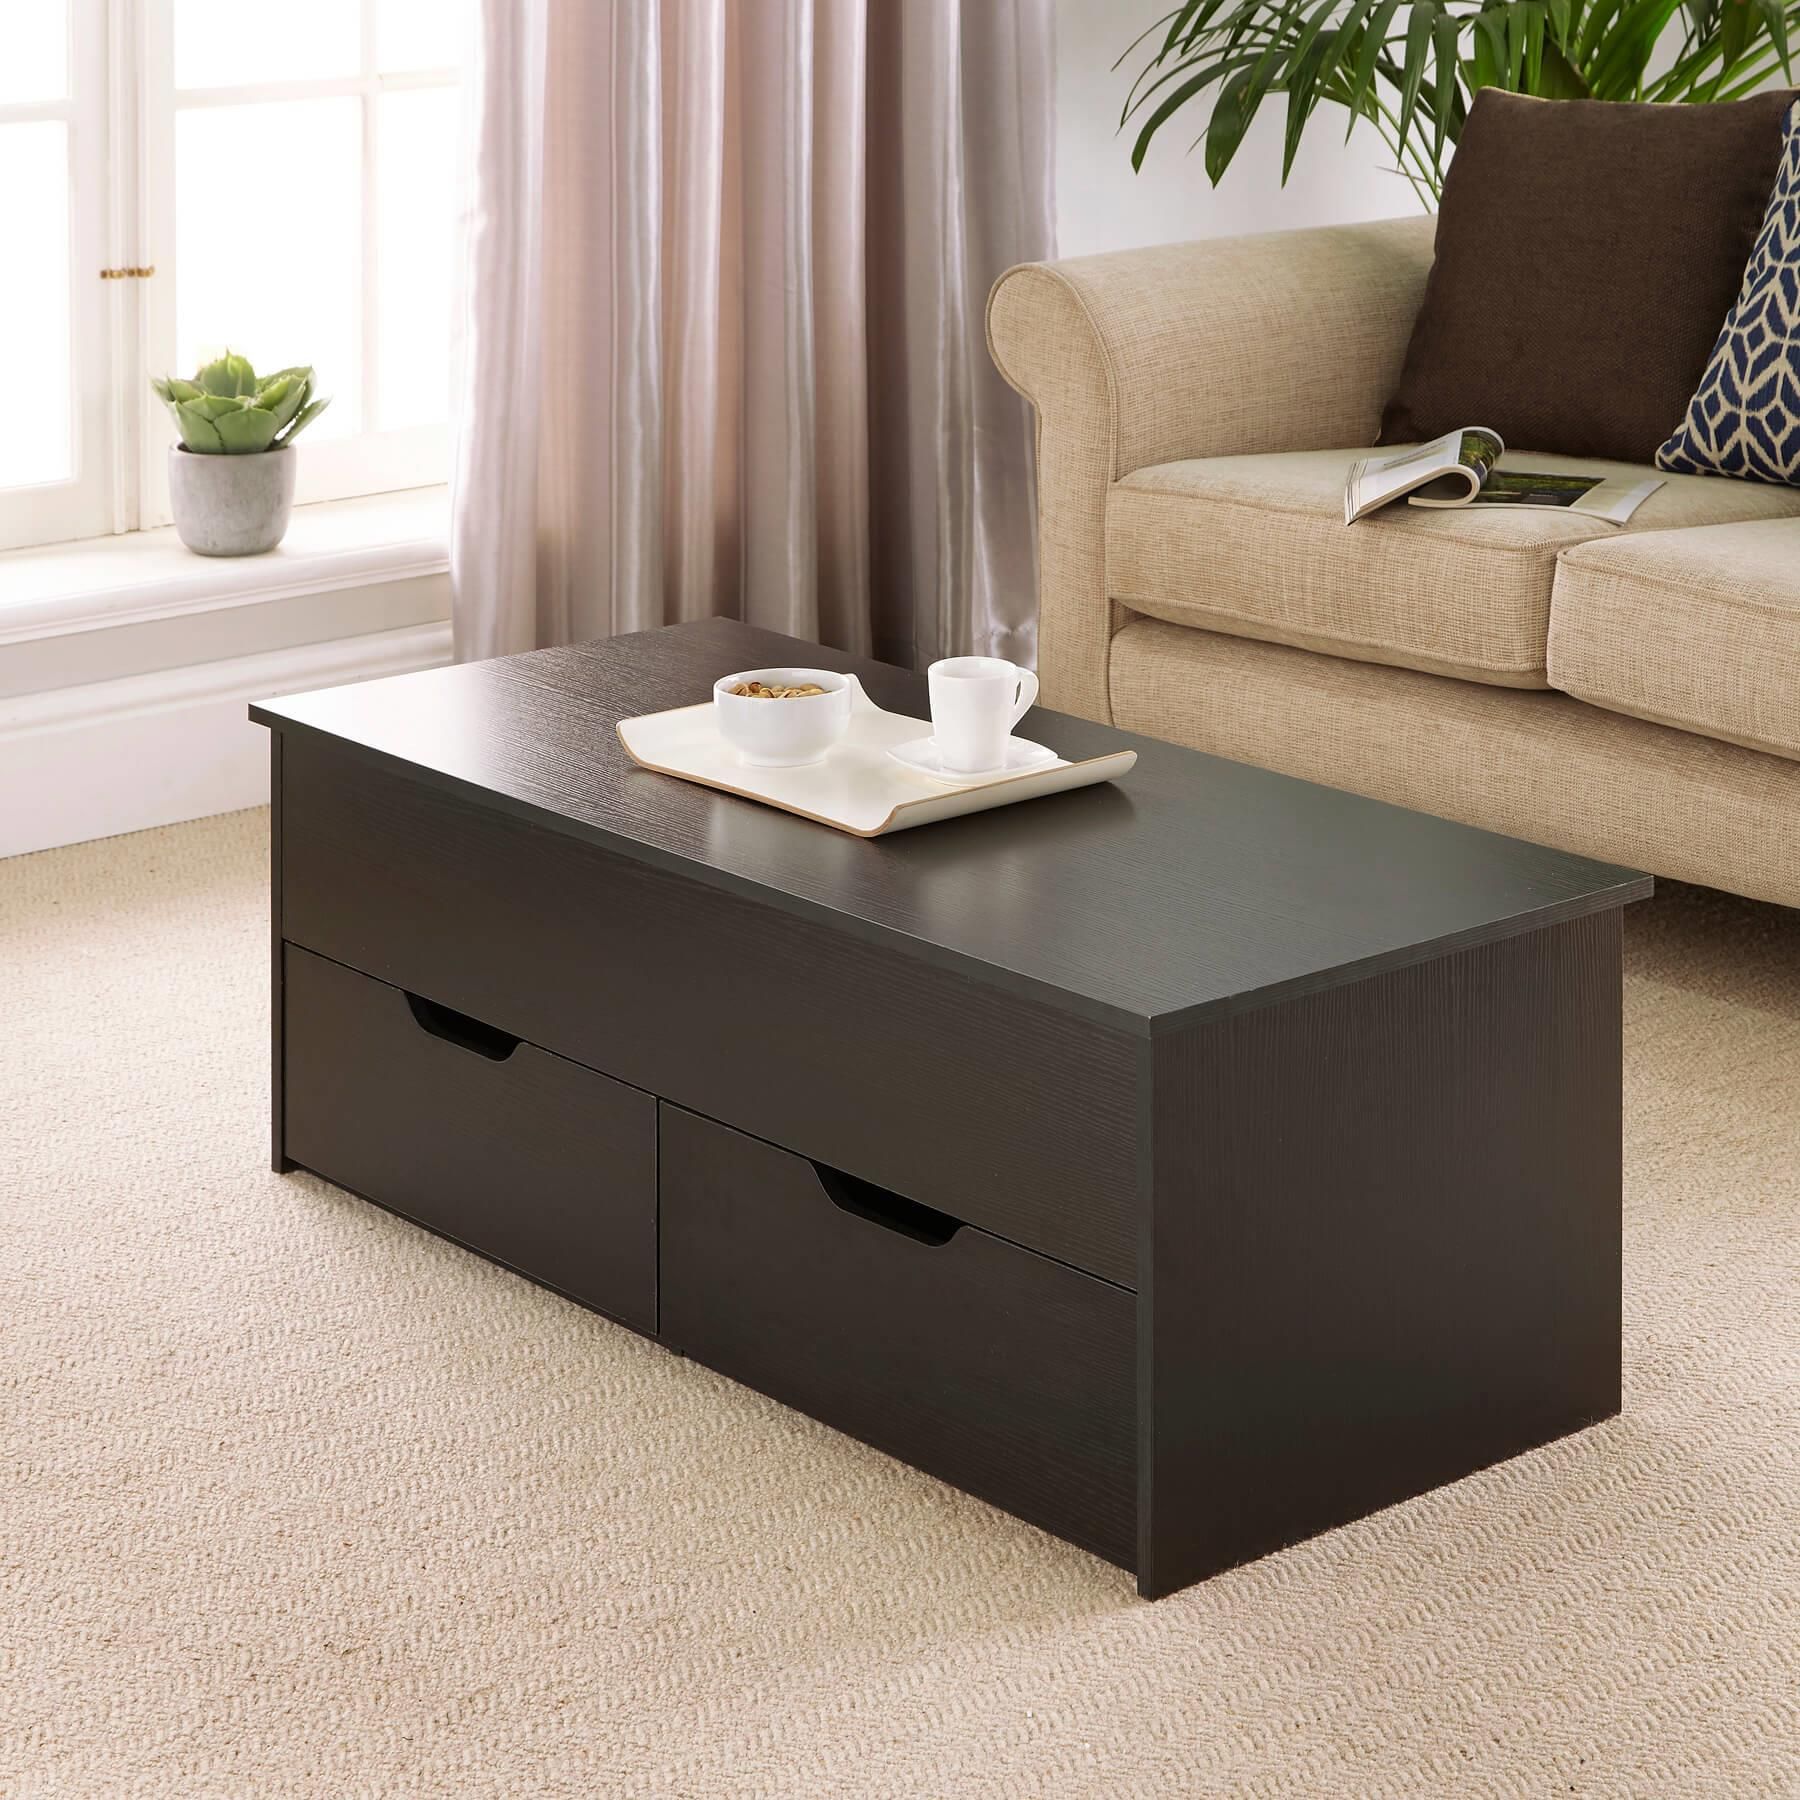 Black Wooden Coffee Table With Lift Up Top And 2 Large Storage Drawers In Lift Top Coffee Tables With Storage Drawers (View 4 of 15)